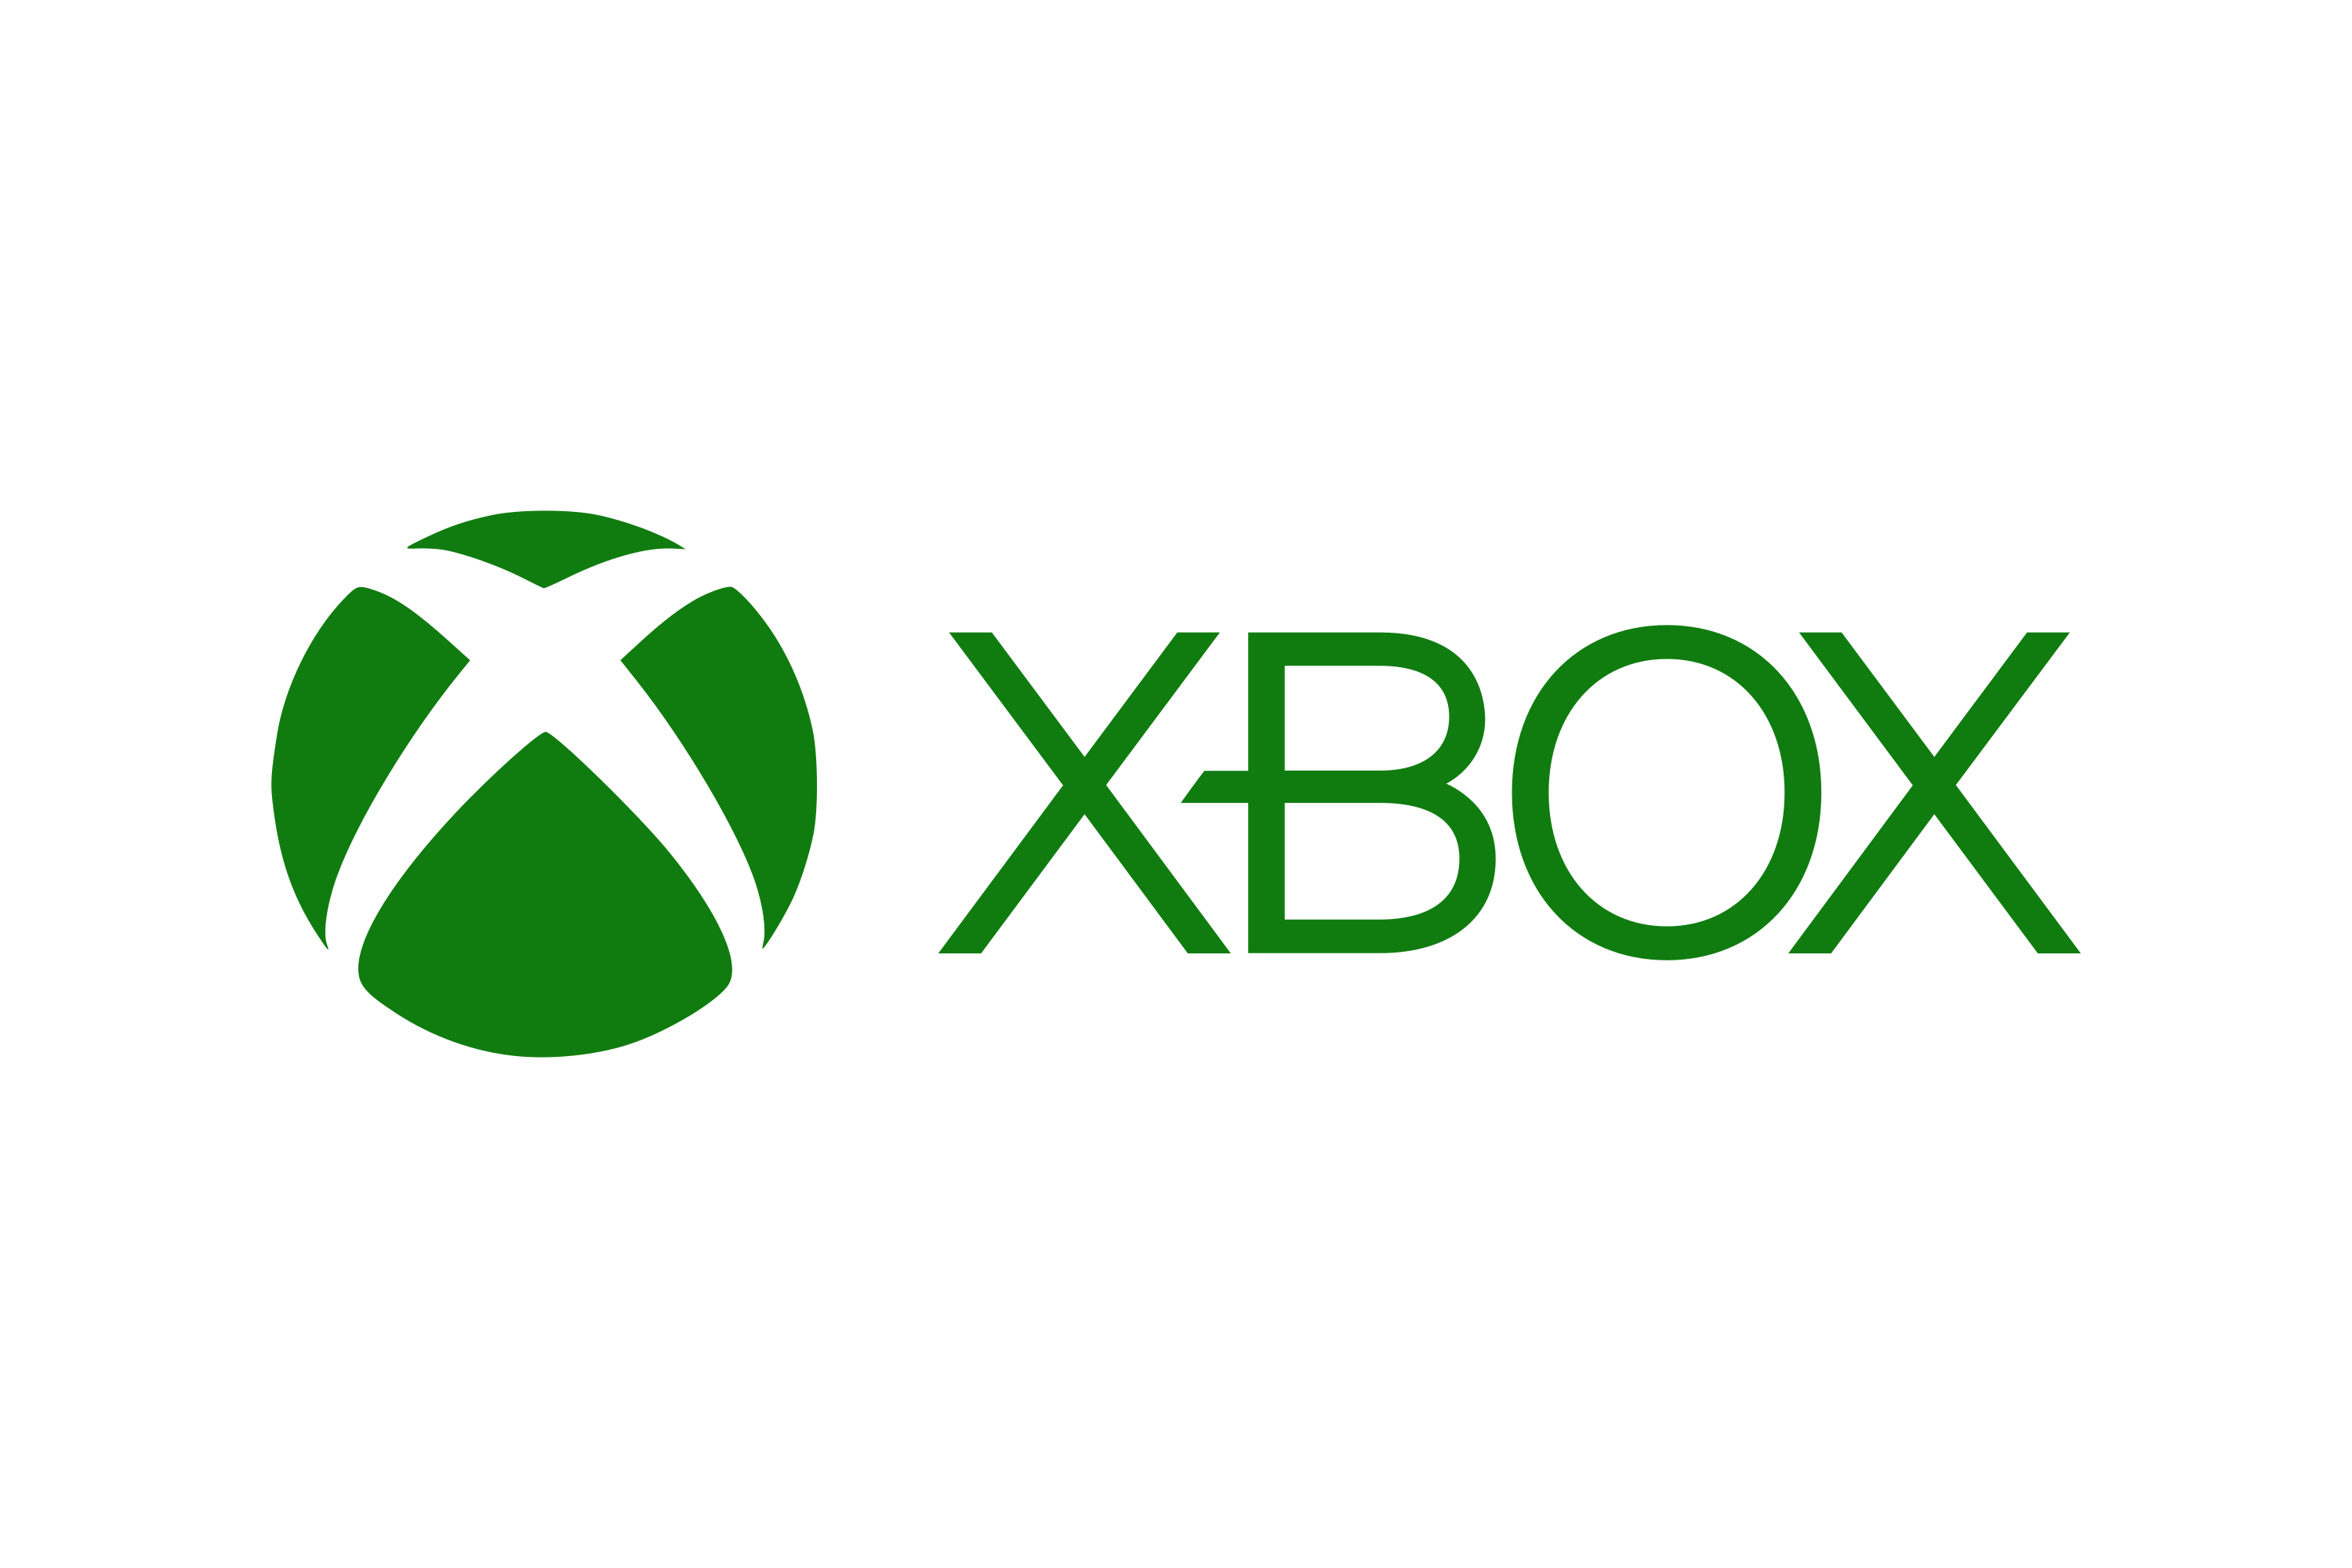 Download Xbox Logo In Svg Vector Or Png File Format   Logo.wine - Xbox, Transparent background PNG HD thumbnail